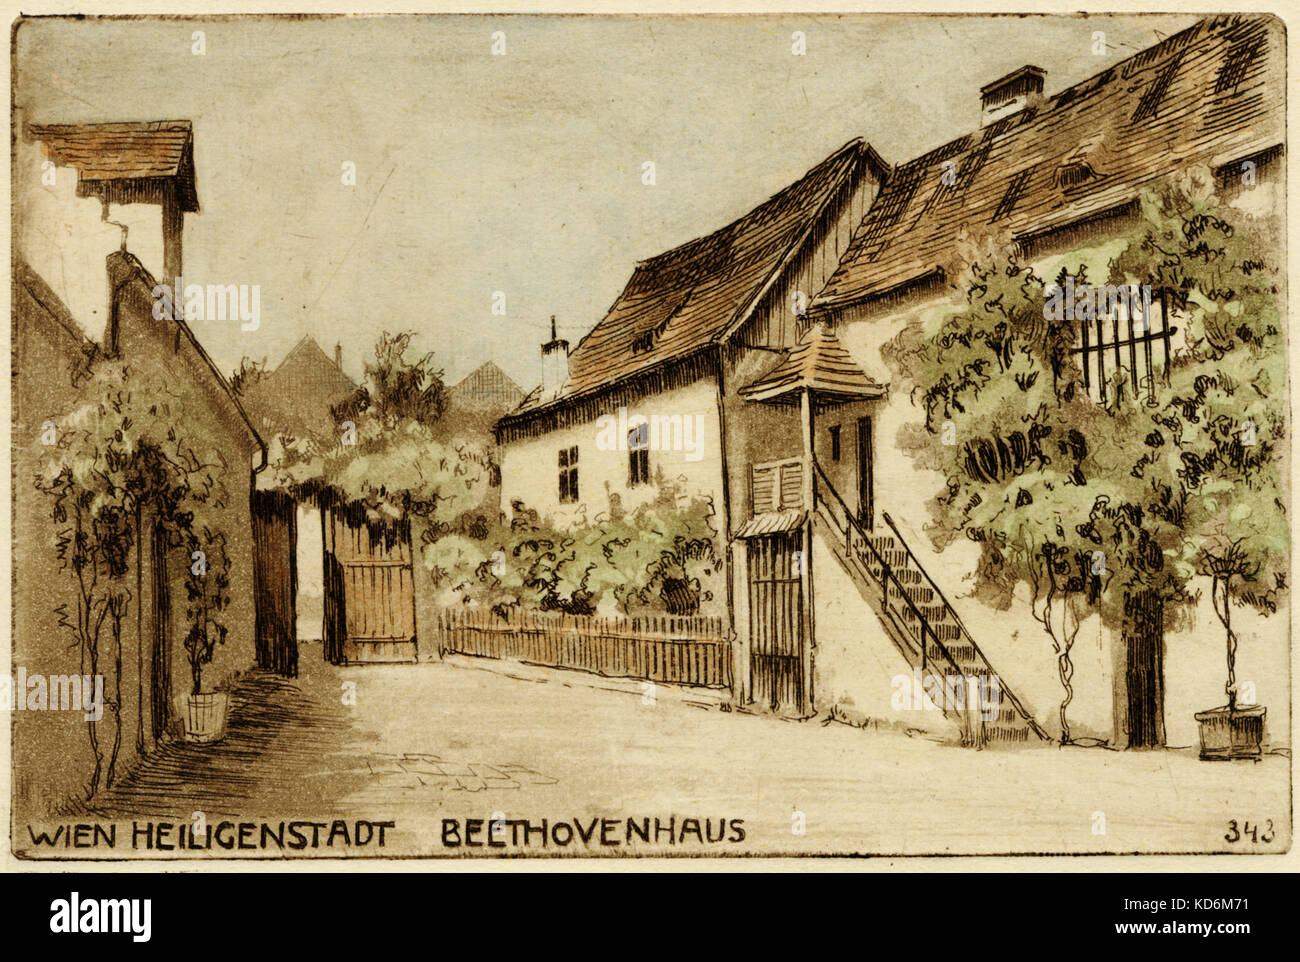 Ludwig van Beethoven 's house in Heiligenstadt, Vienna. Drawn by L V Pollak. German composer, 17 December 1770 - 26 March 1827. His summer retreat in 1802, 1807, 1808, 1817. In 1802 he wrote a moving letter at the onset of his deafness named the Heiligenstadt Testament. Postcard Stock Photo